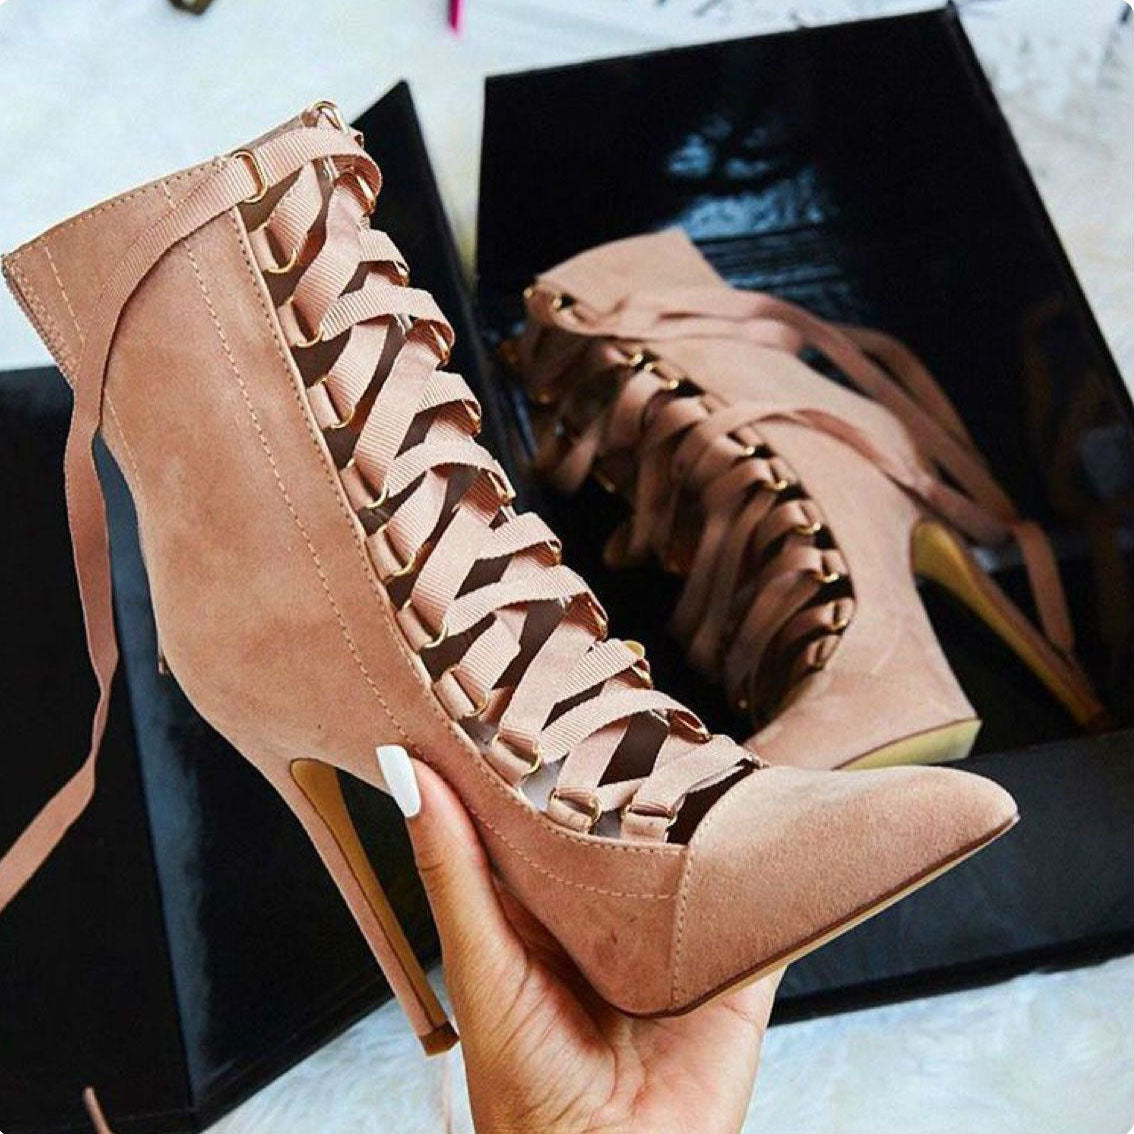 Hollow Out Lace Up Pointed Toe Stiletto High Heels Short Boots Shoes